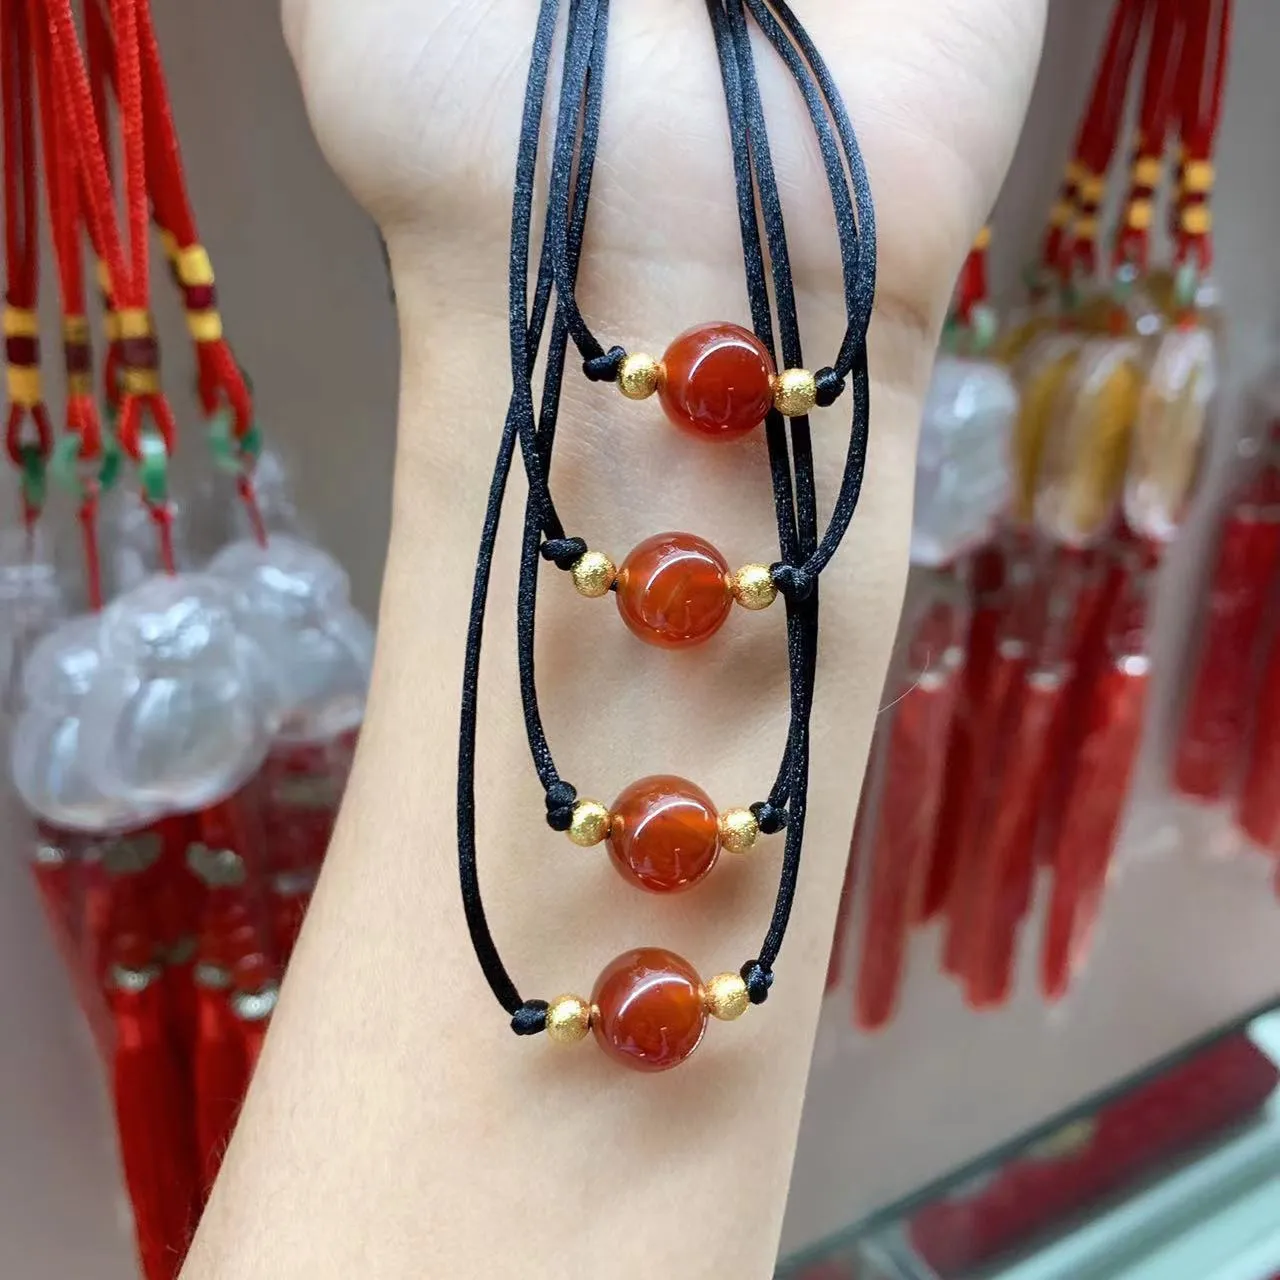 Red Agate Jequirity Bean Pendant With Ball Bing Lucky Amber Bead Necklace  And Adjustable Black Rope Perfect Couples Gift From Pingwang3, $50.77 |  DHgate.Com